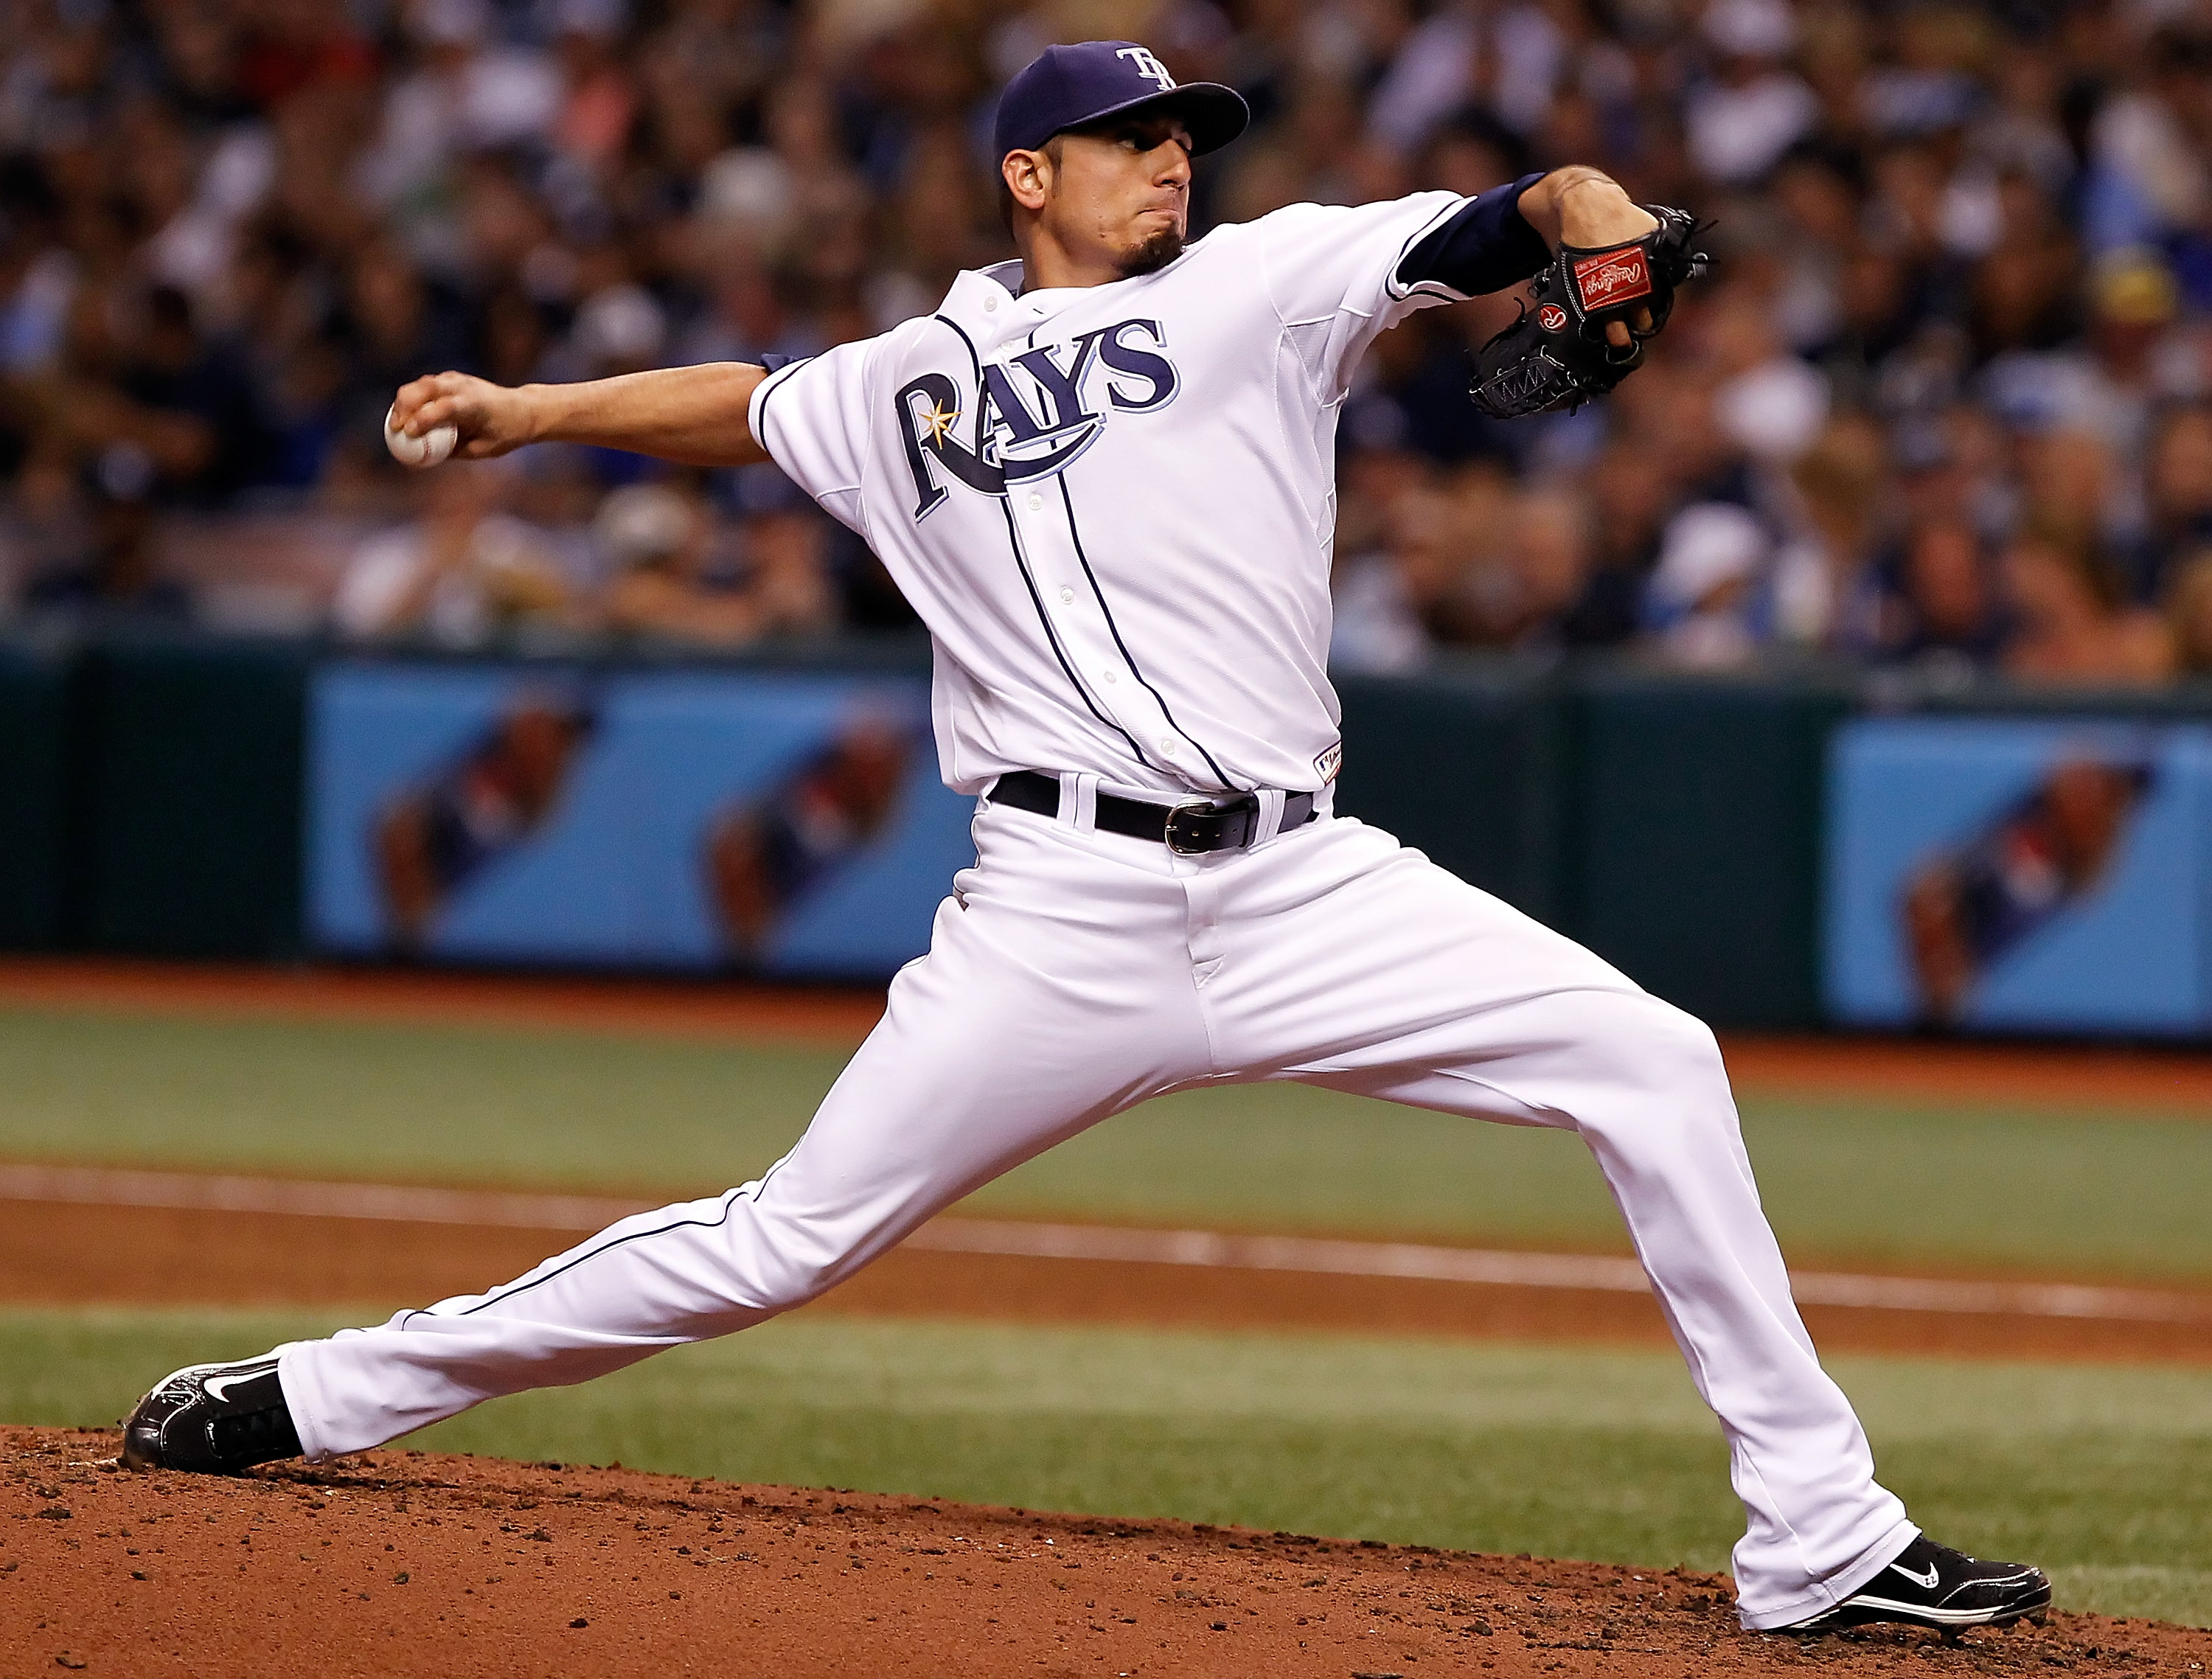 ST. PETERSBURG, FL - SEPTEMBER 14:  Pitcher Matt Garza #22 of the Tampa Bay Rays pitches against the New York Yankees during the game at Tropicana Field on September 14, 2010 in St. Petersburg, Florida.  (Photo by J. Meric/Getty Images)